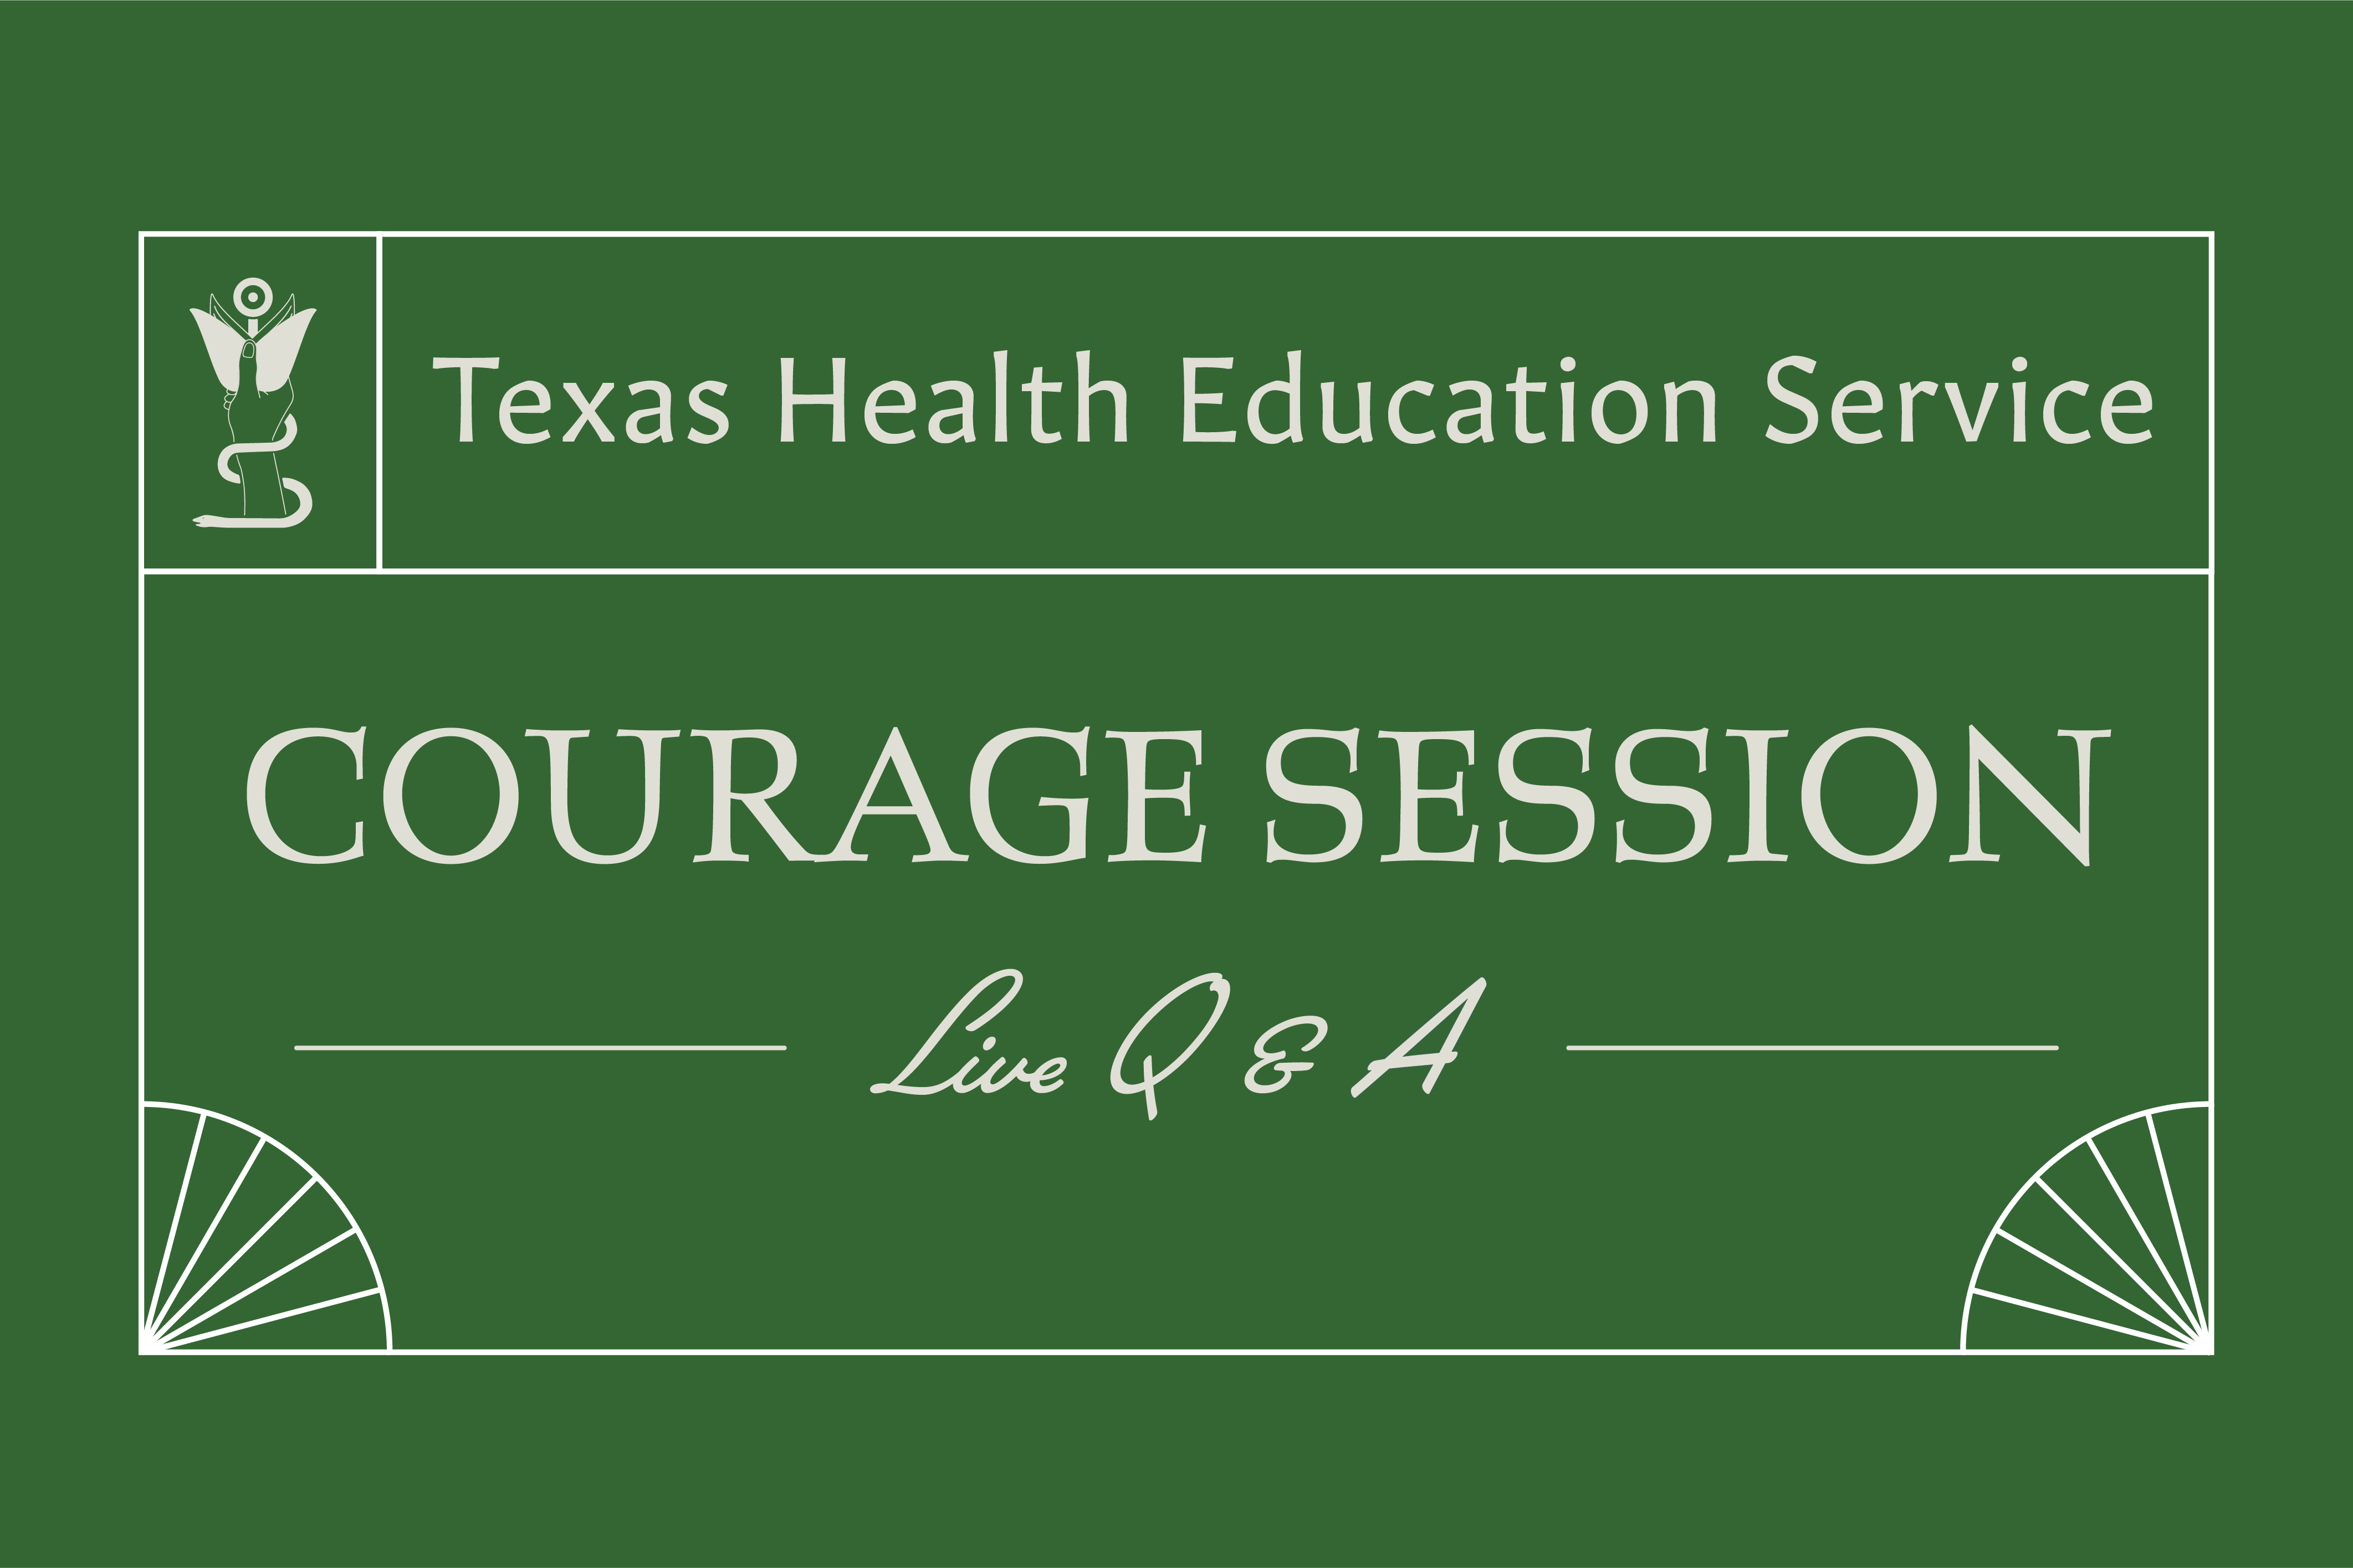   https://www.txhes.com/_resources/images/newsroom-resources/banners-covers/courage-session-logo.jpg